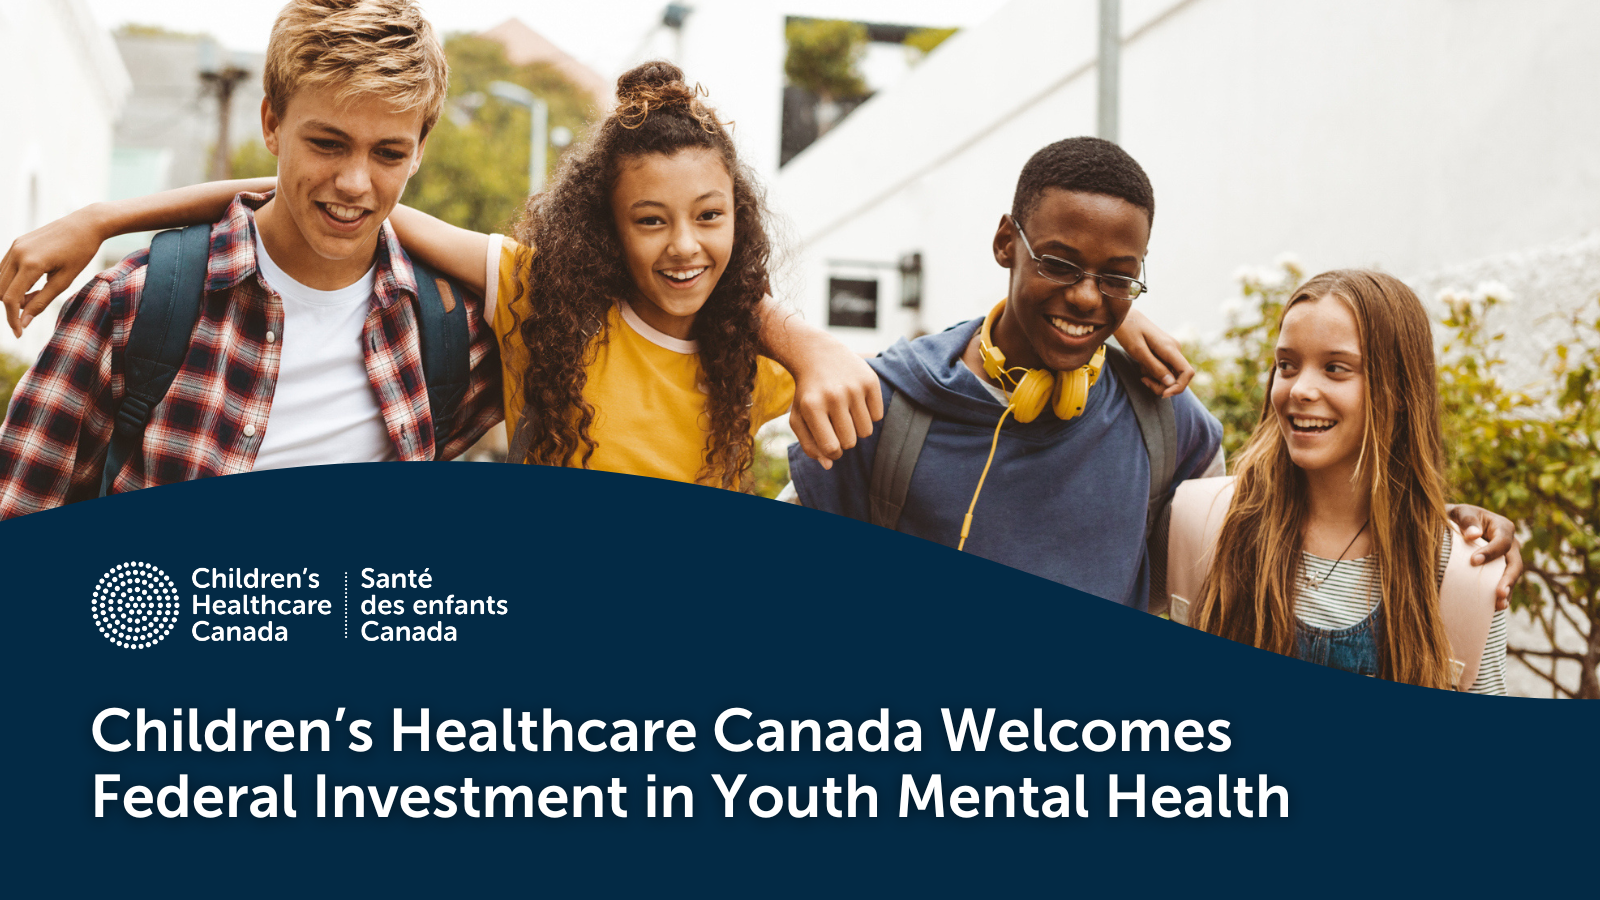 A group of happy youth with their arms over each others shoulders. The graphic has the Children's Healthcare Canada logo and text that reads 